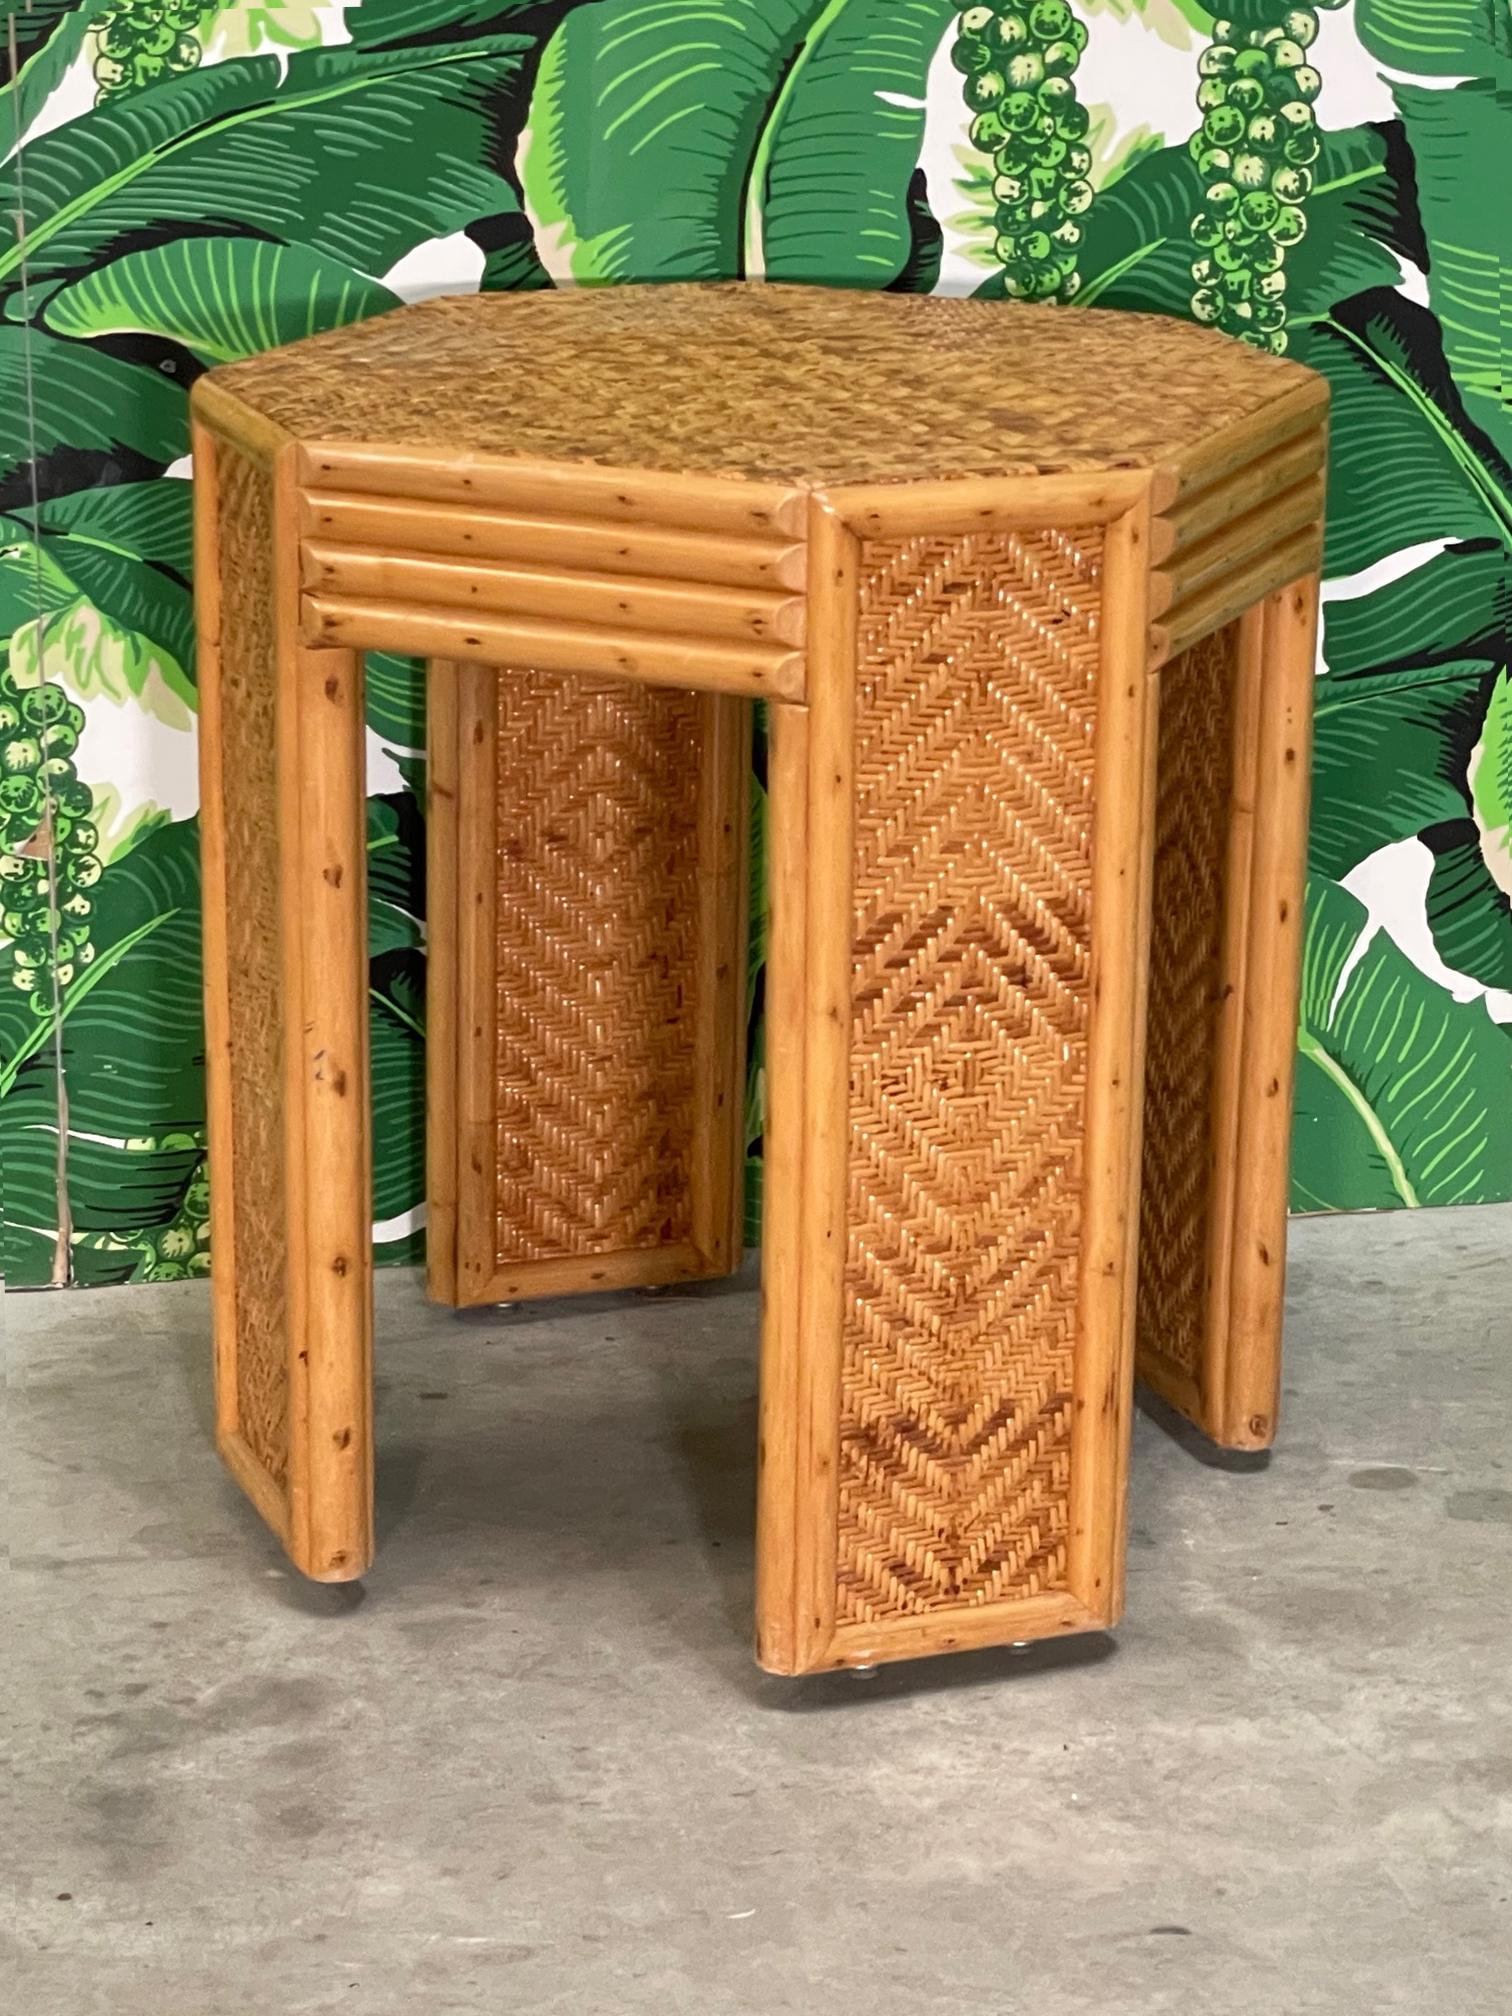 Rattan dining base features a veneer of basketweave wicker and a geometric design. Good condition with minor imperfections consistent with age, see photos for details of condition.

 